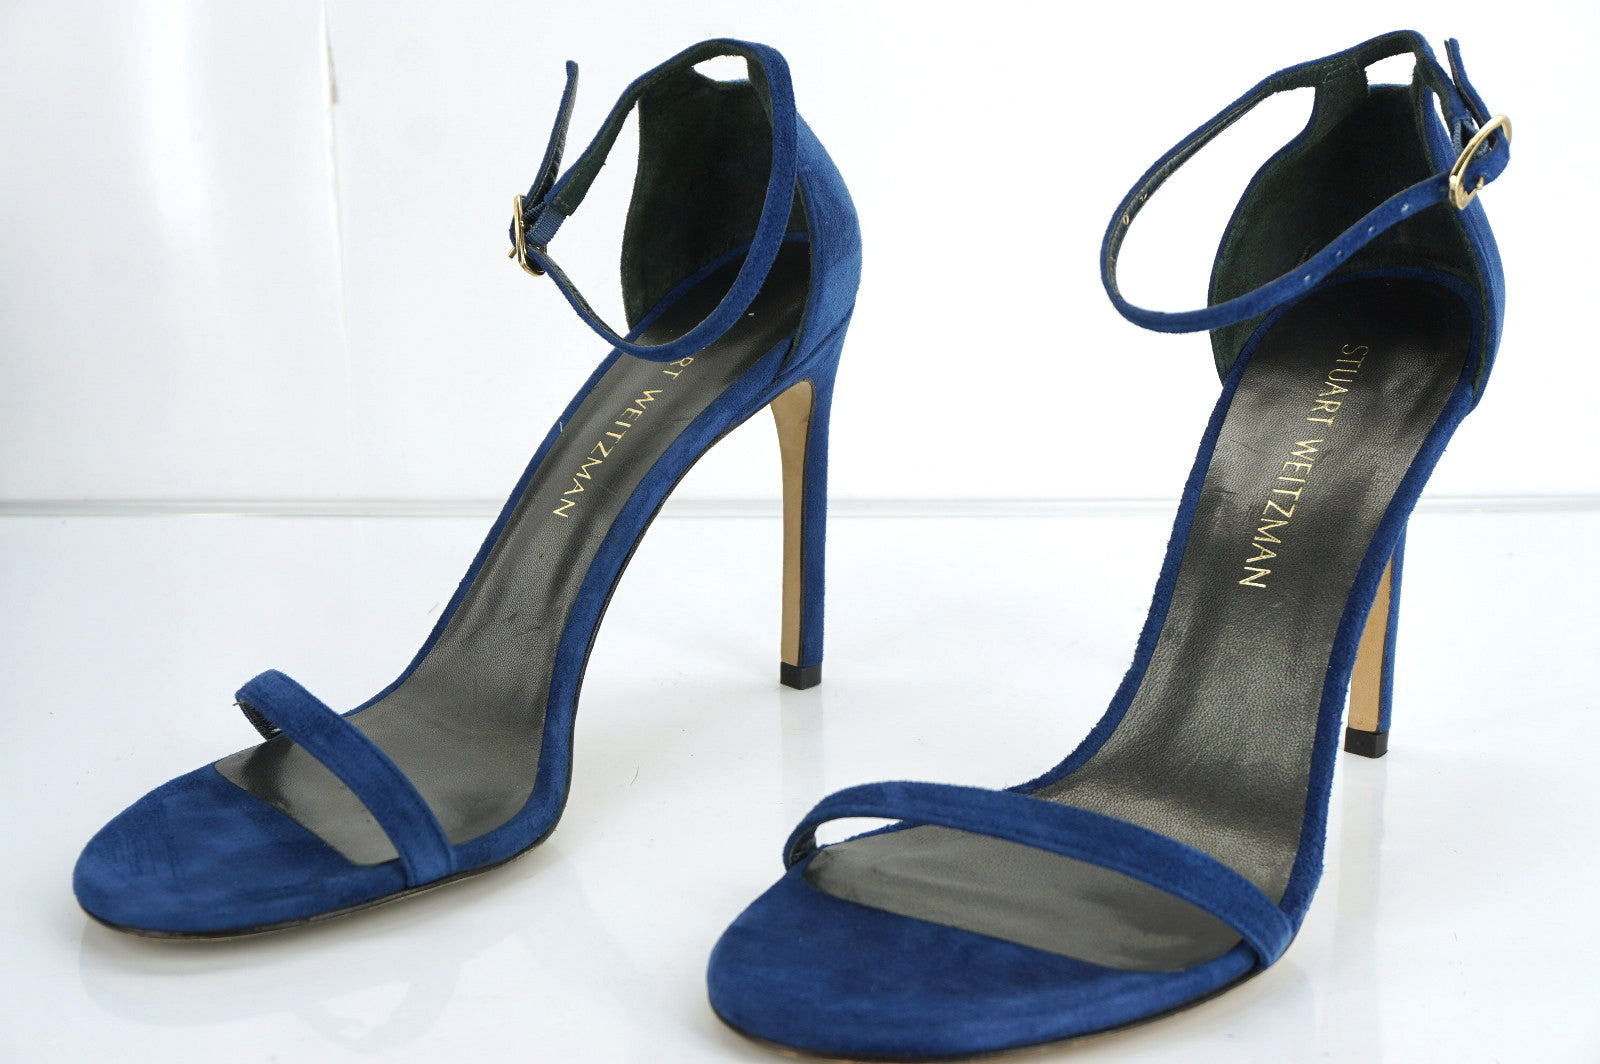 Stuart Weitzman Nudistsong Blue Suede Ankle Strappy Sandals Size 9.5 NIB $398